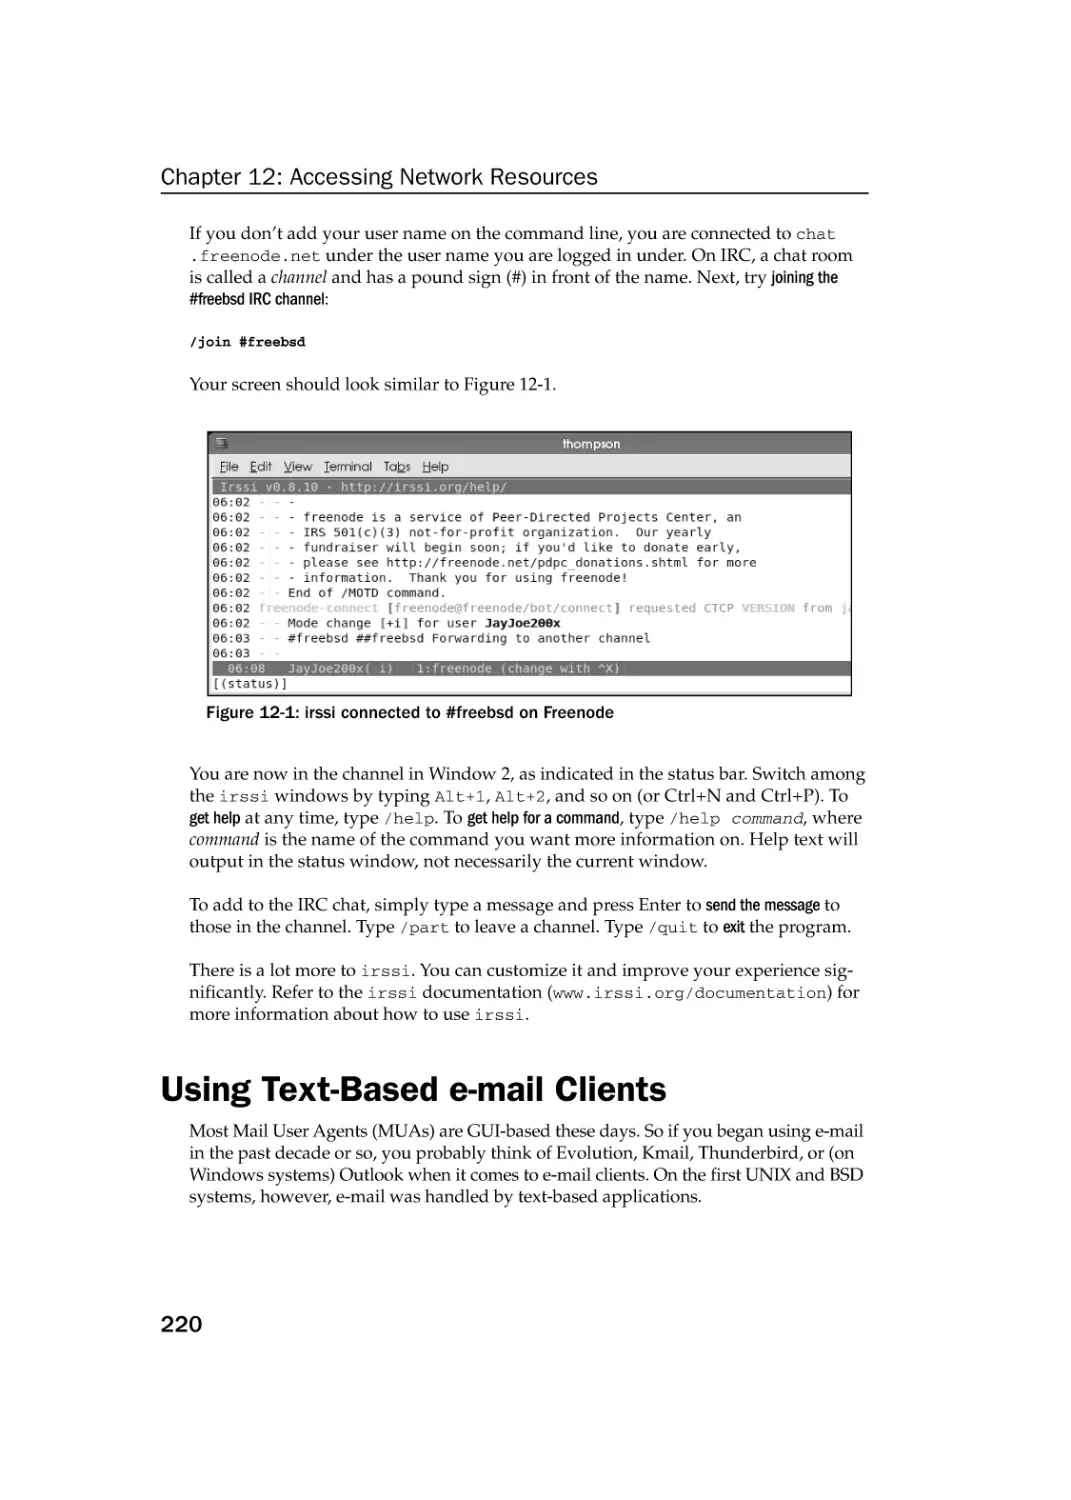 Using Text-Based e-mail Clients